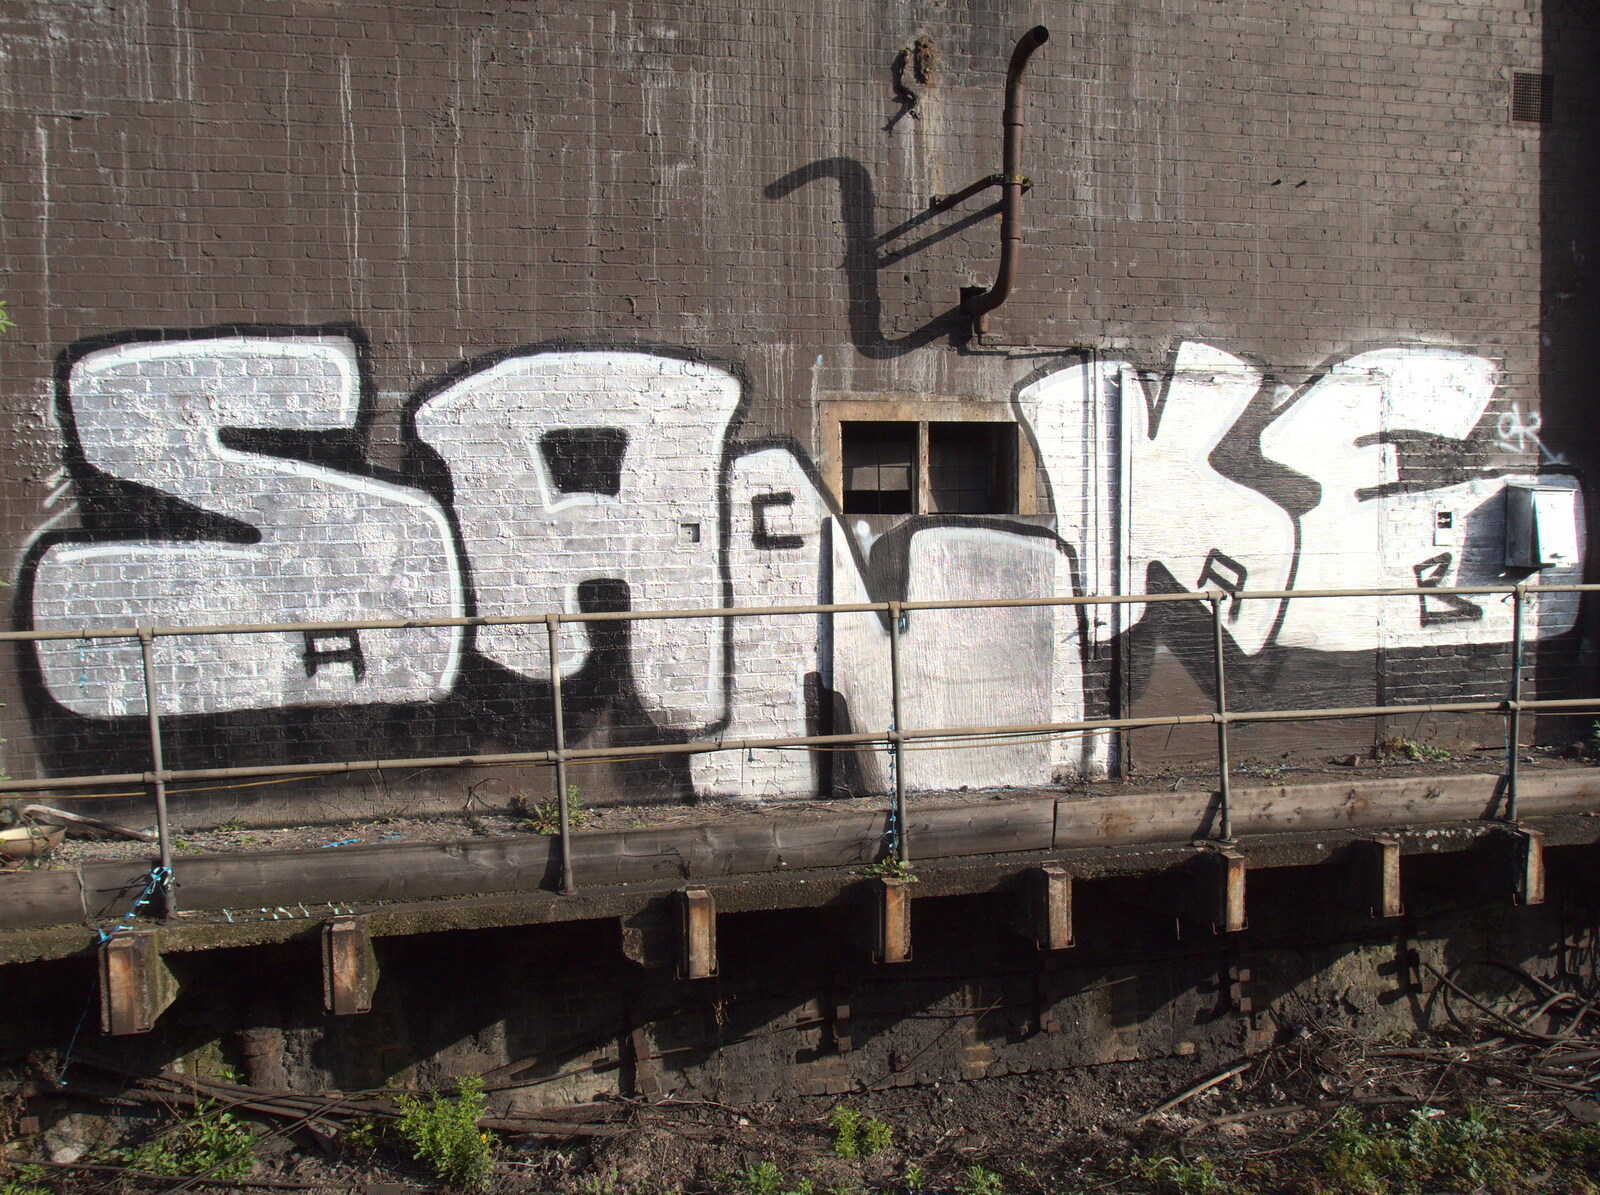 Sanke silver tag graffiti from Digger Action and other March Miscellany, Suffolk and London - 21st March 2017